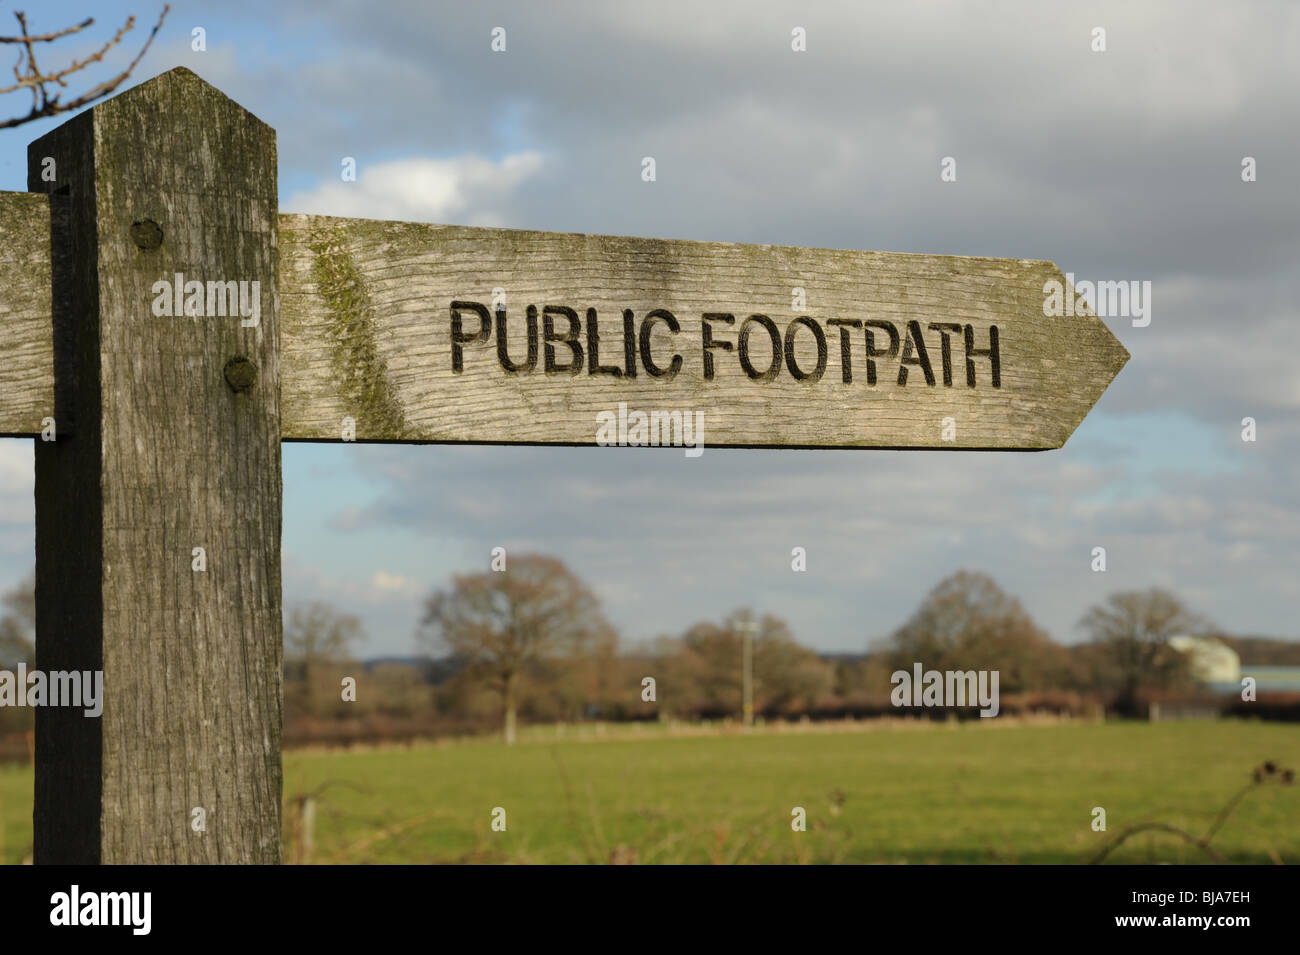 Public footpath sign Stock Photo